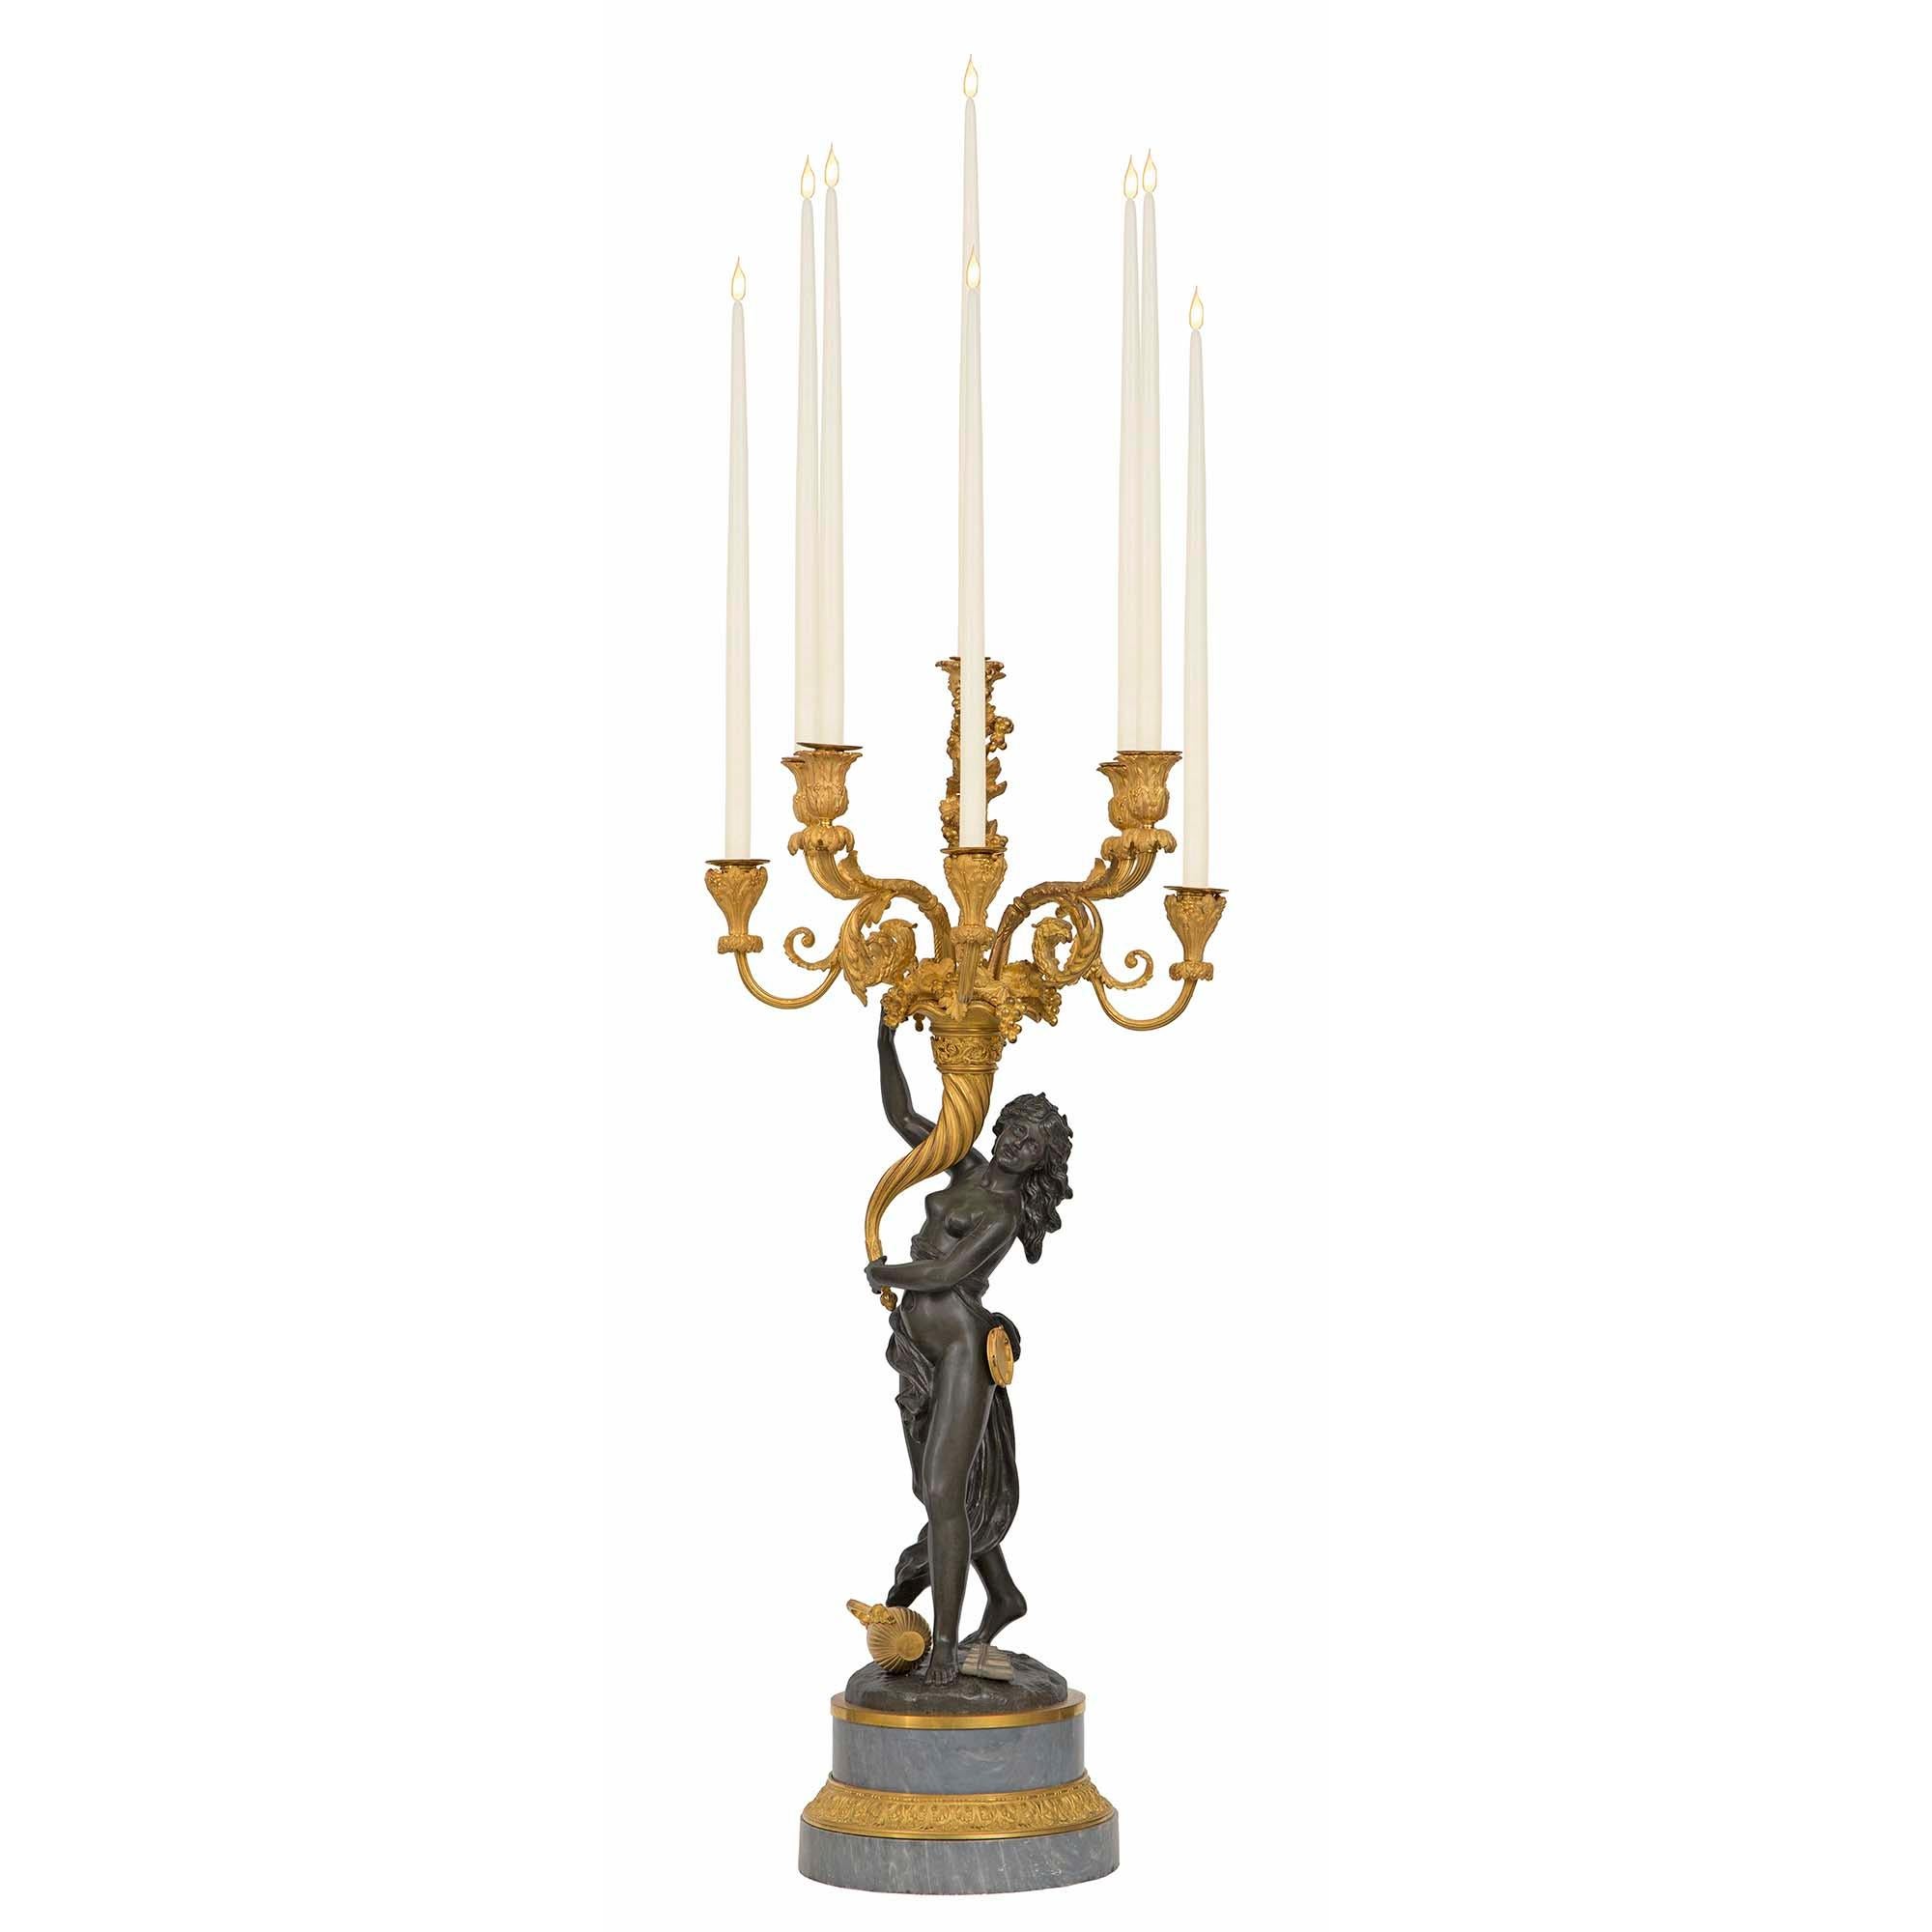 An exquisite and large scale true pair of French 19th century Louis XVI st. ormolu, patinated bronze and marble candelabras, after a model by Clodion. Each candelabra is raised by a striking stepped Bleu Turquin marble base, with a fine wrap around